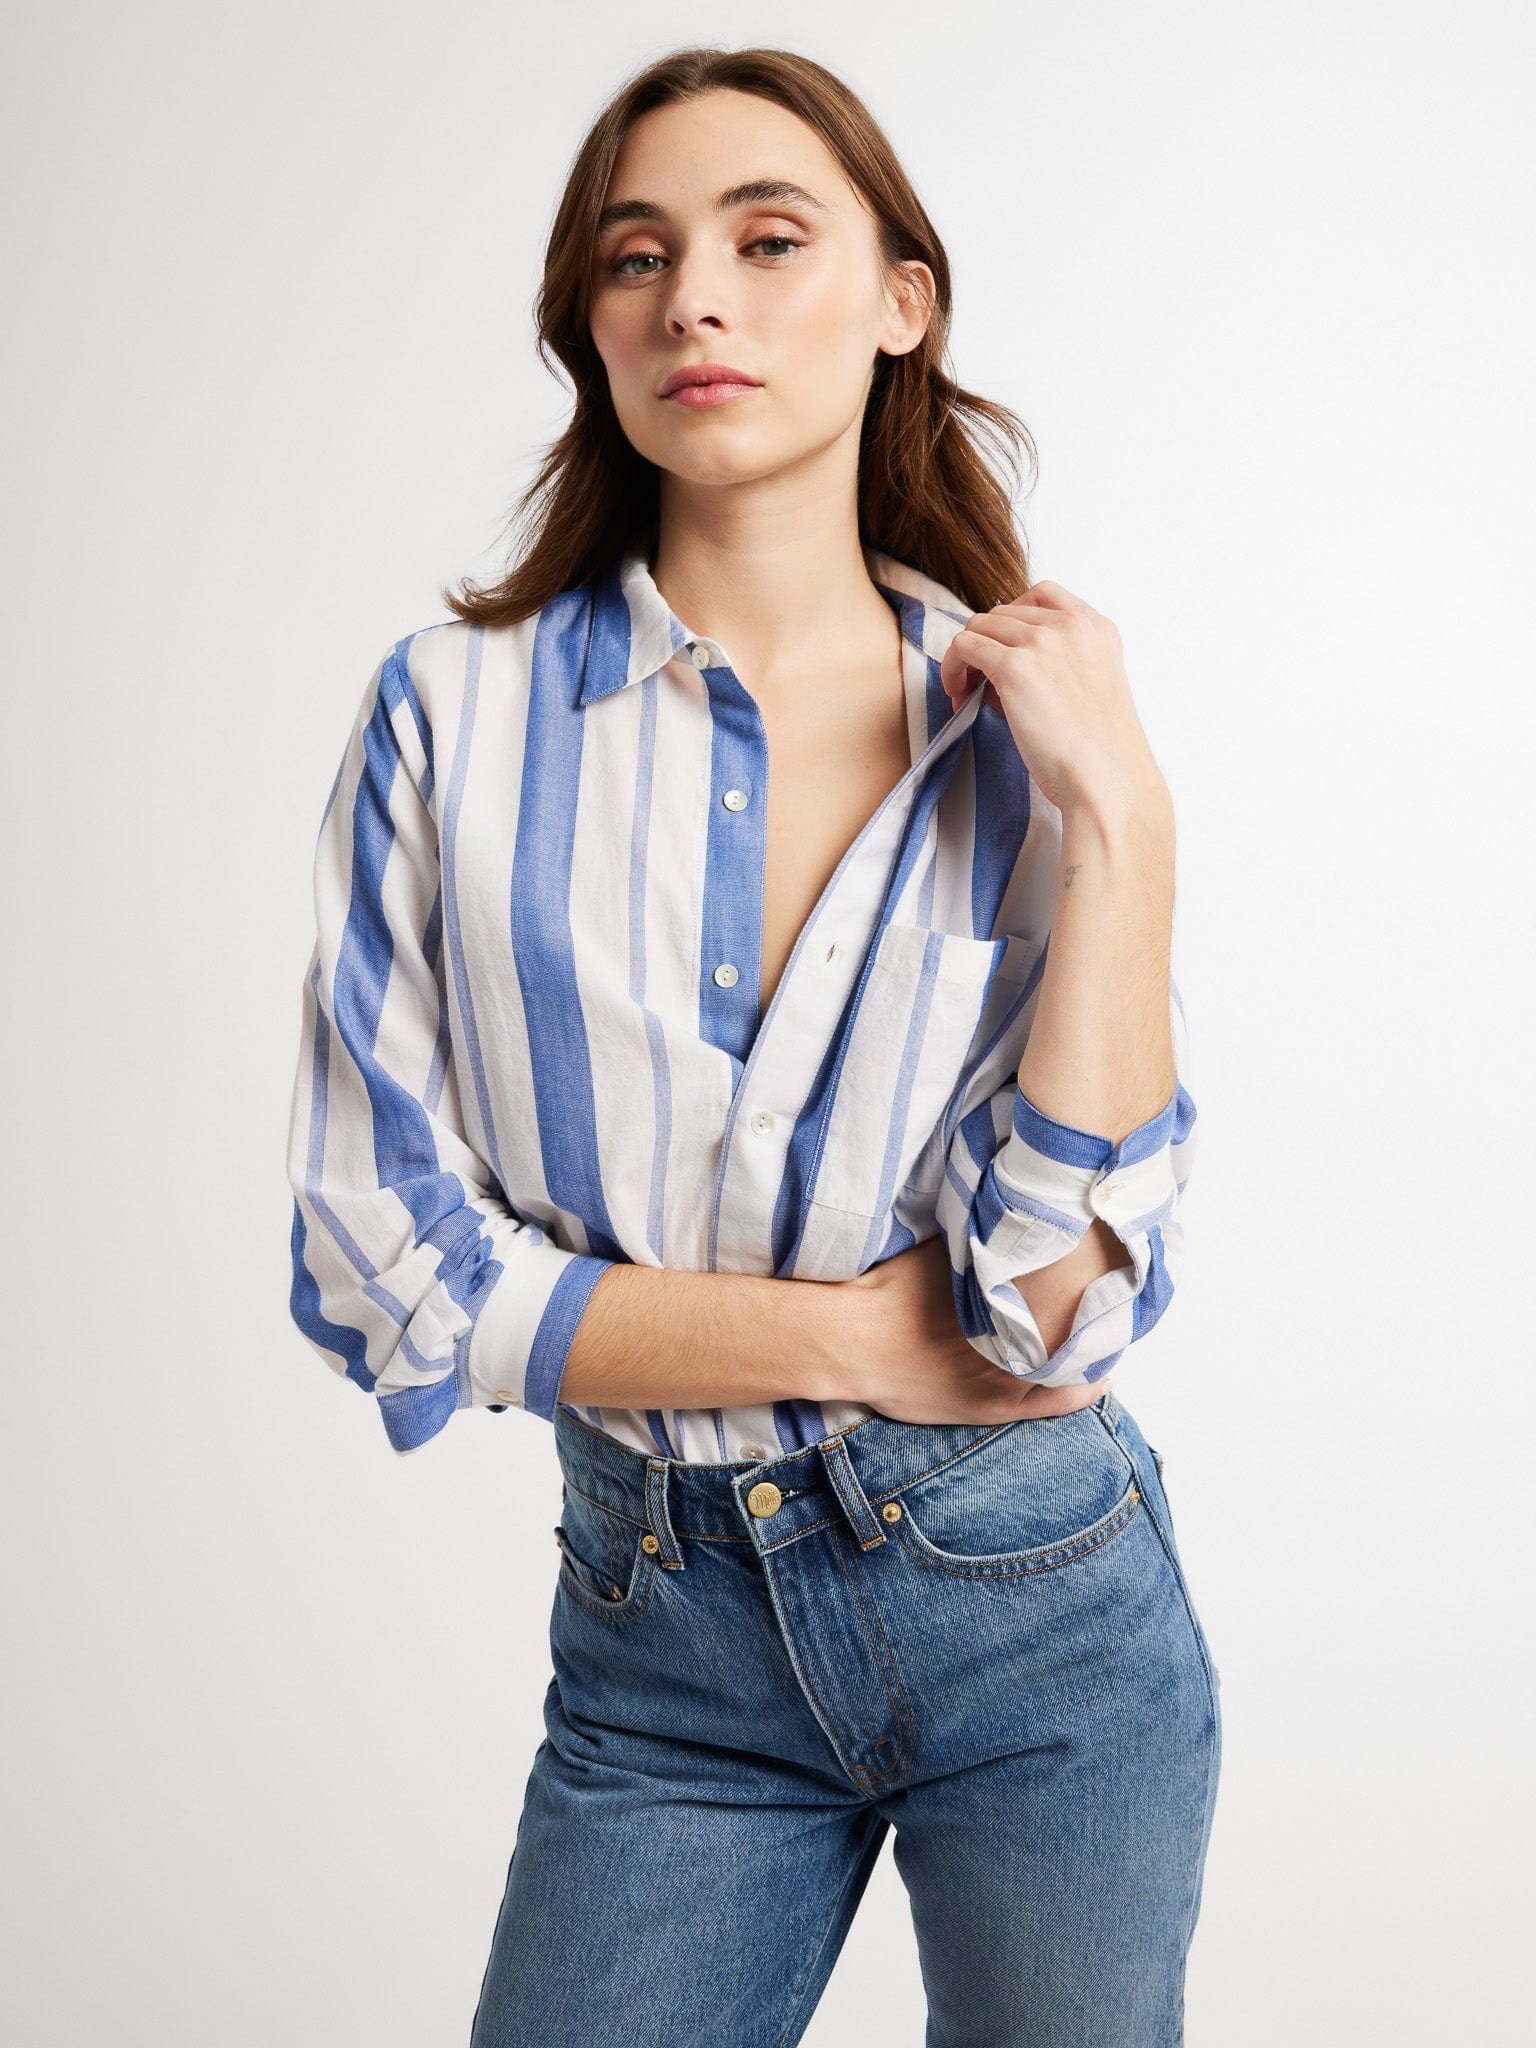 MILLE Clothing Sofia Top in Nantucket Stripe